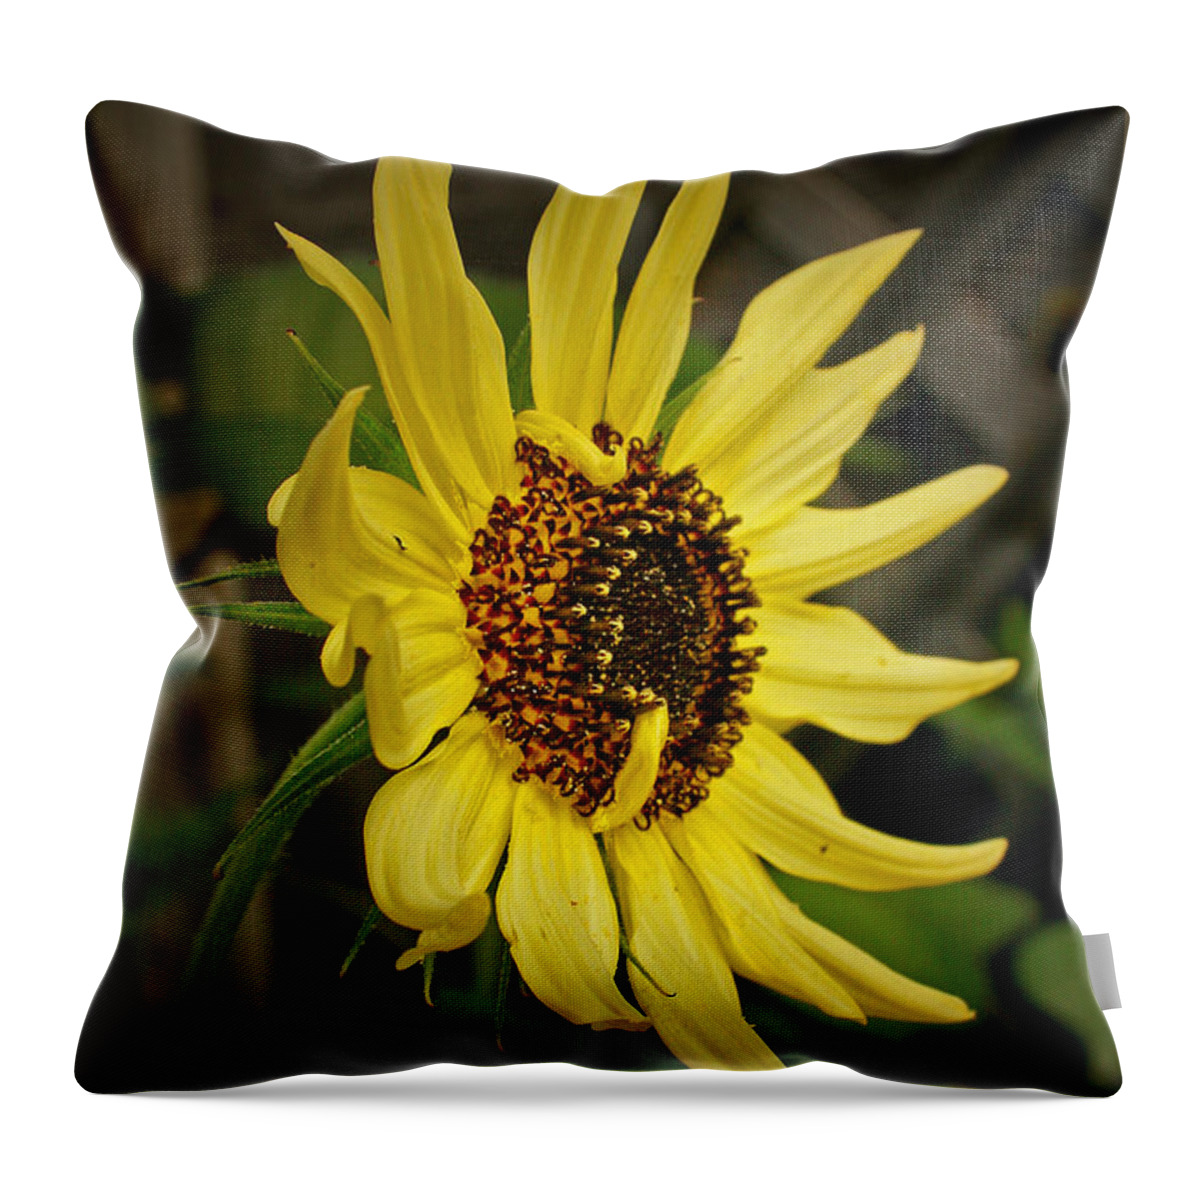 Sunflower Throw Pillow featuring the photograph Tall And Proud by Susan McMenamin